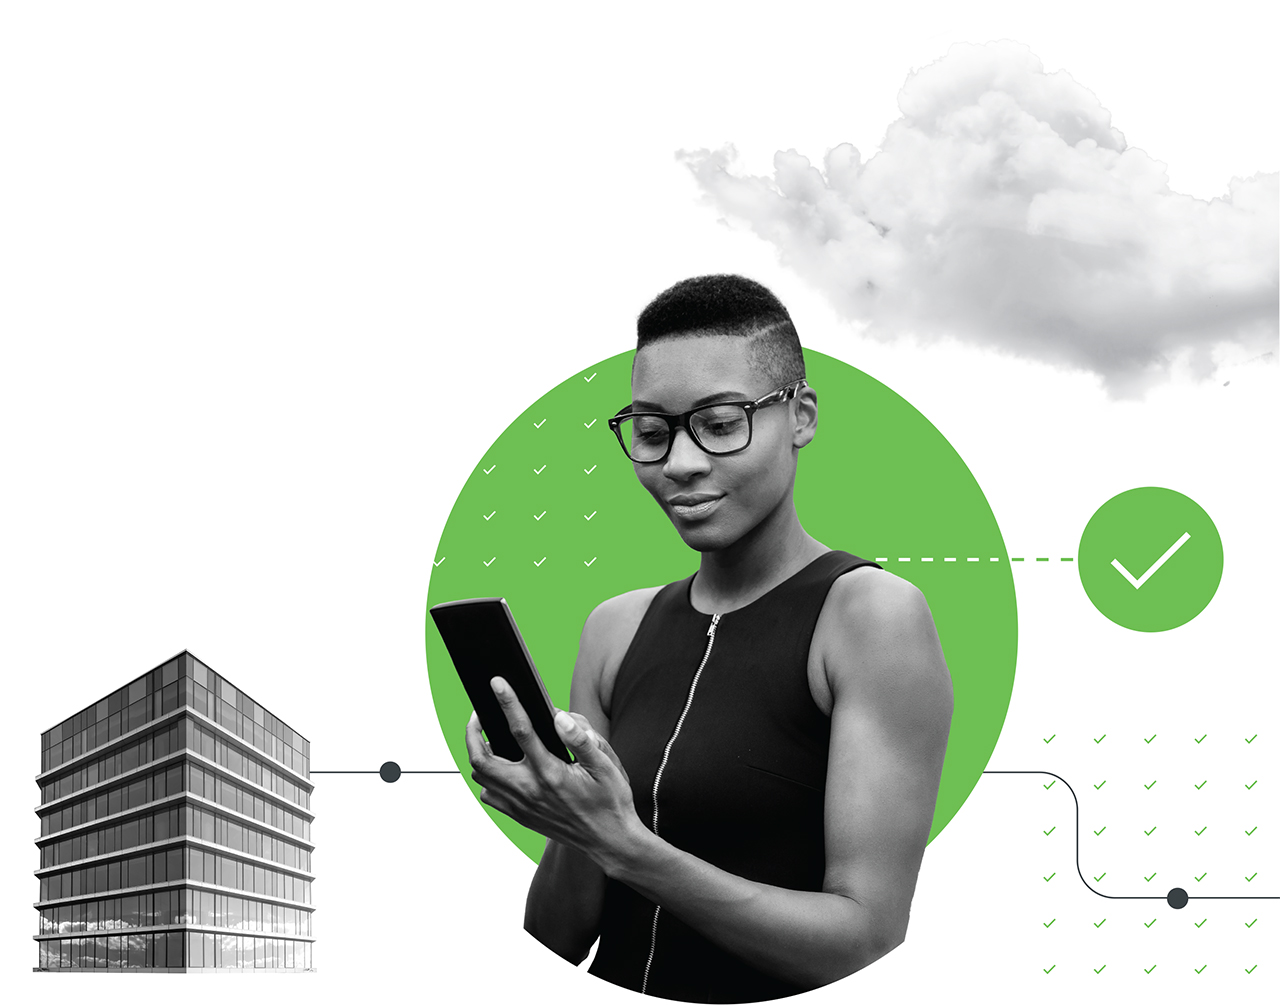 A collage with a flow from a building to a person in glasses holding a smartphone to a checkmark, with a cloud overhead